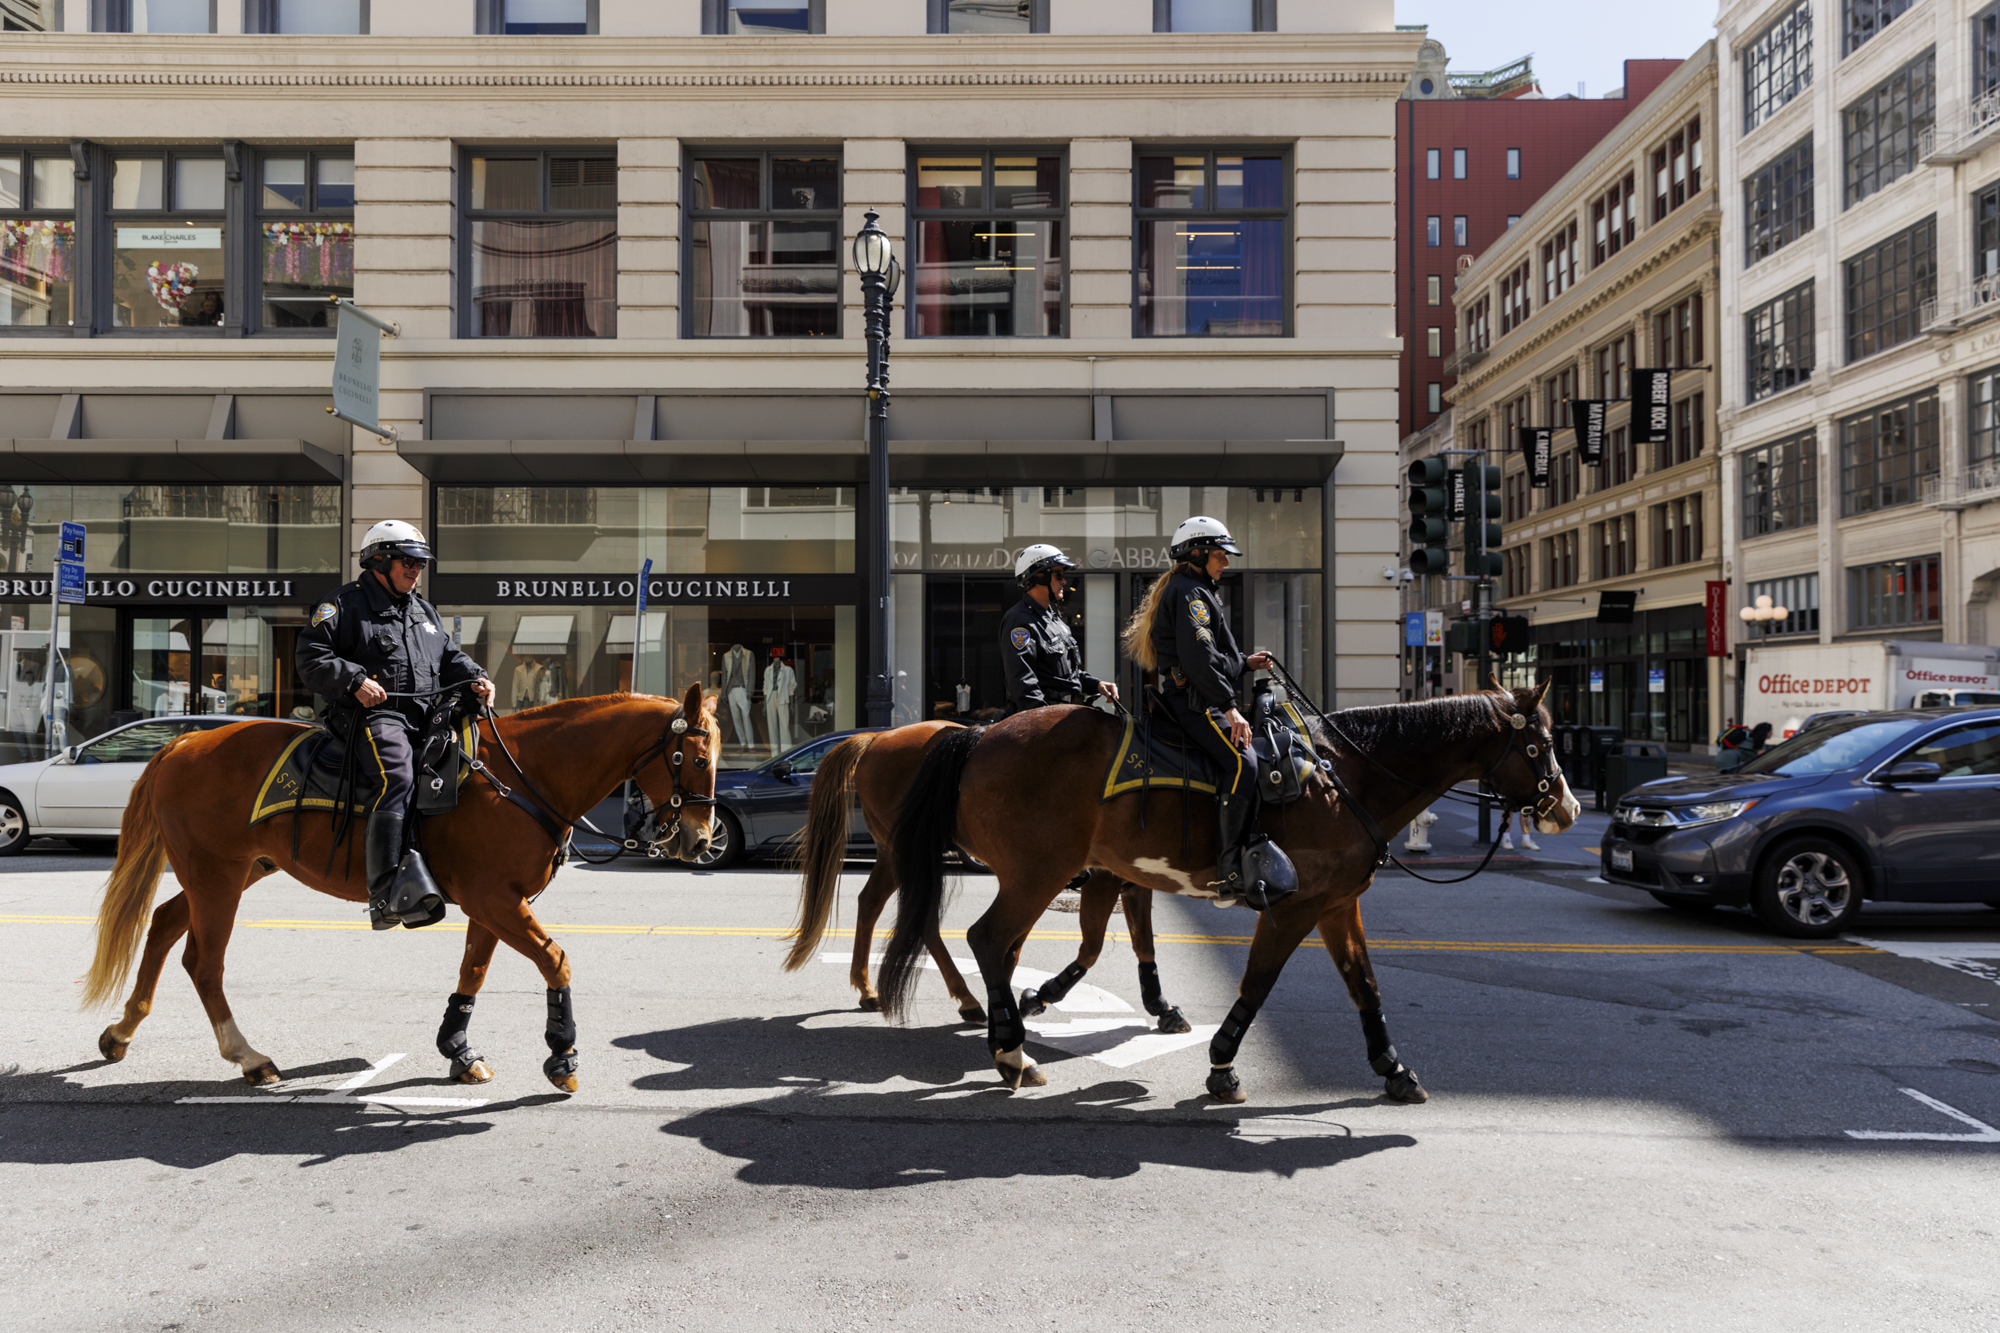 Three police officers on horseback ride down a city street near Union Square.